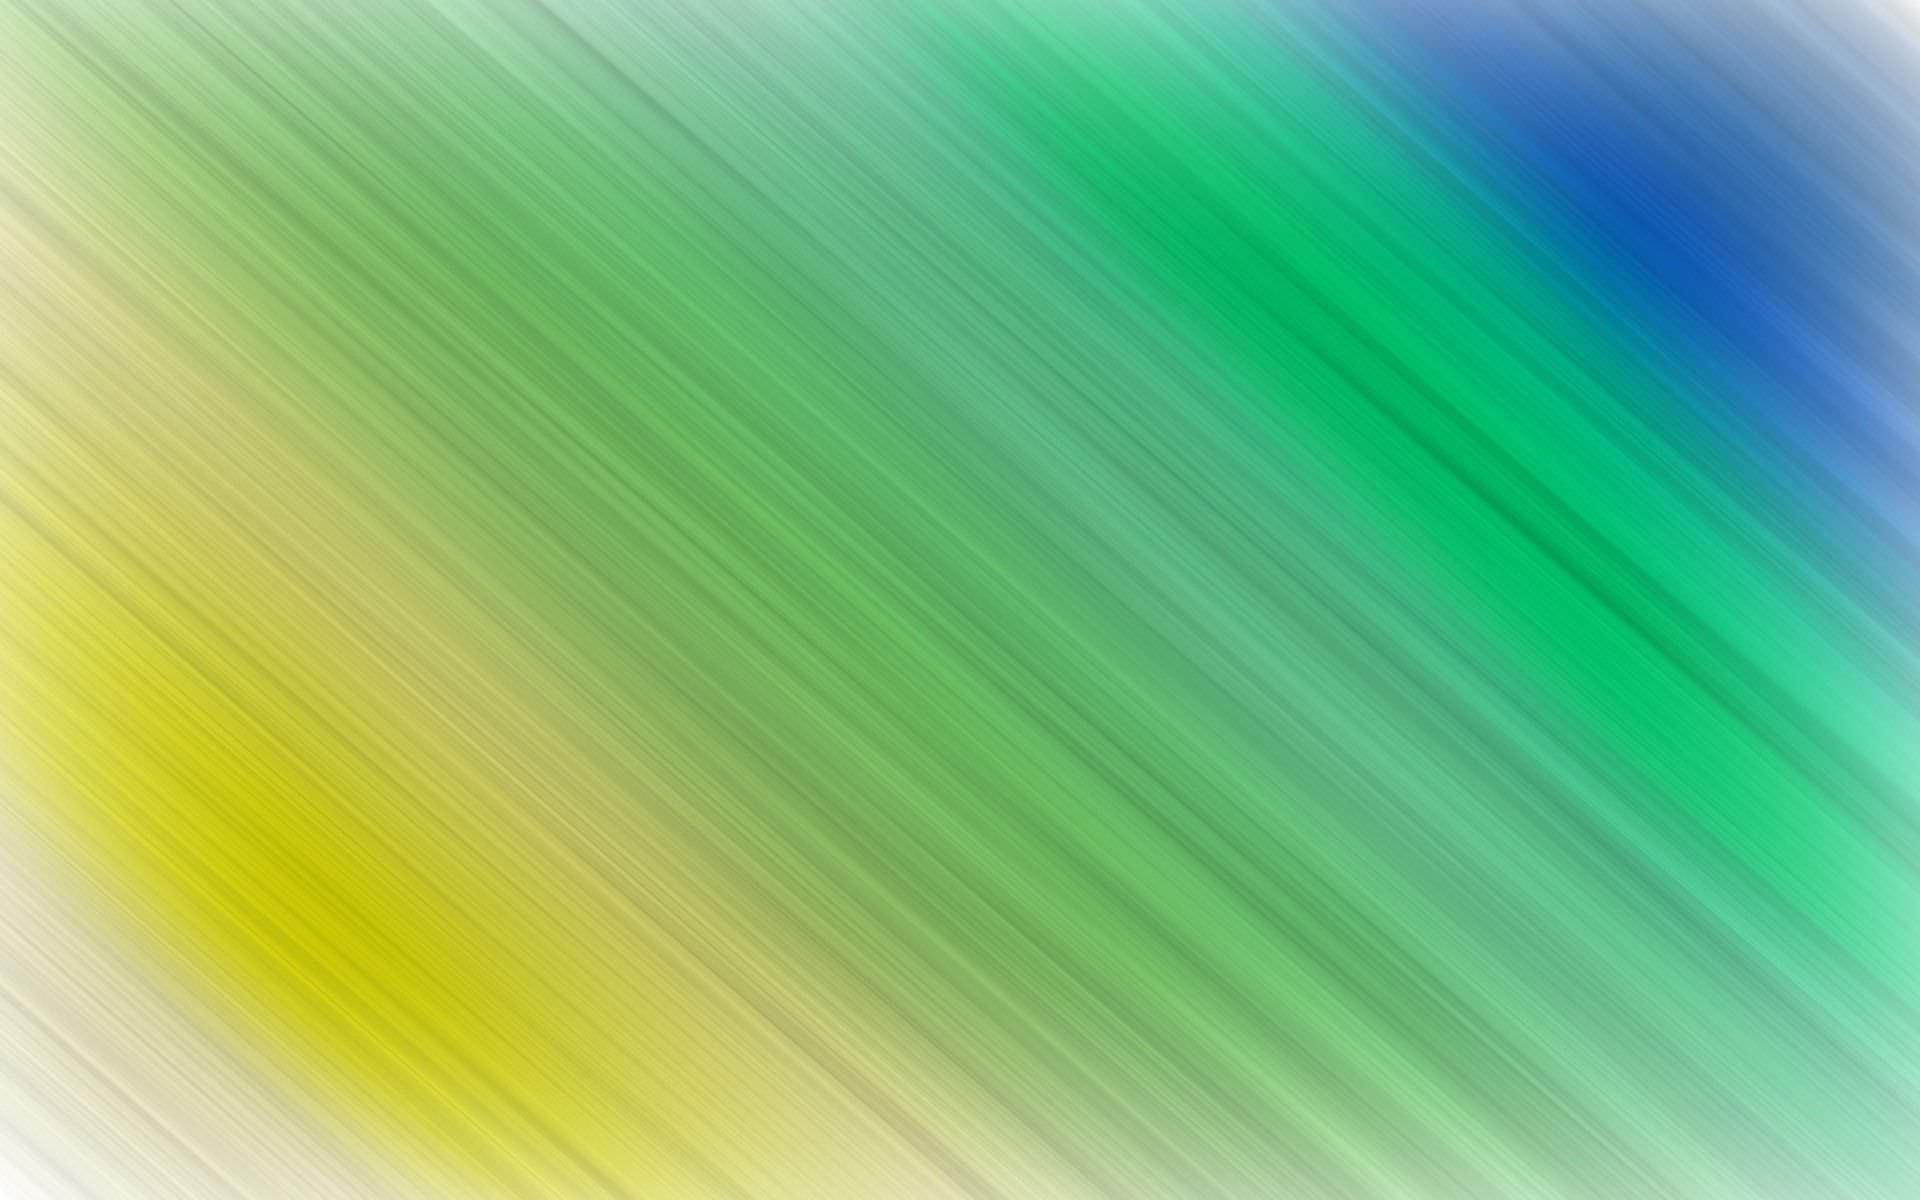 Colorful Stripes Background